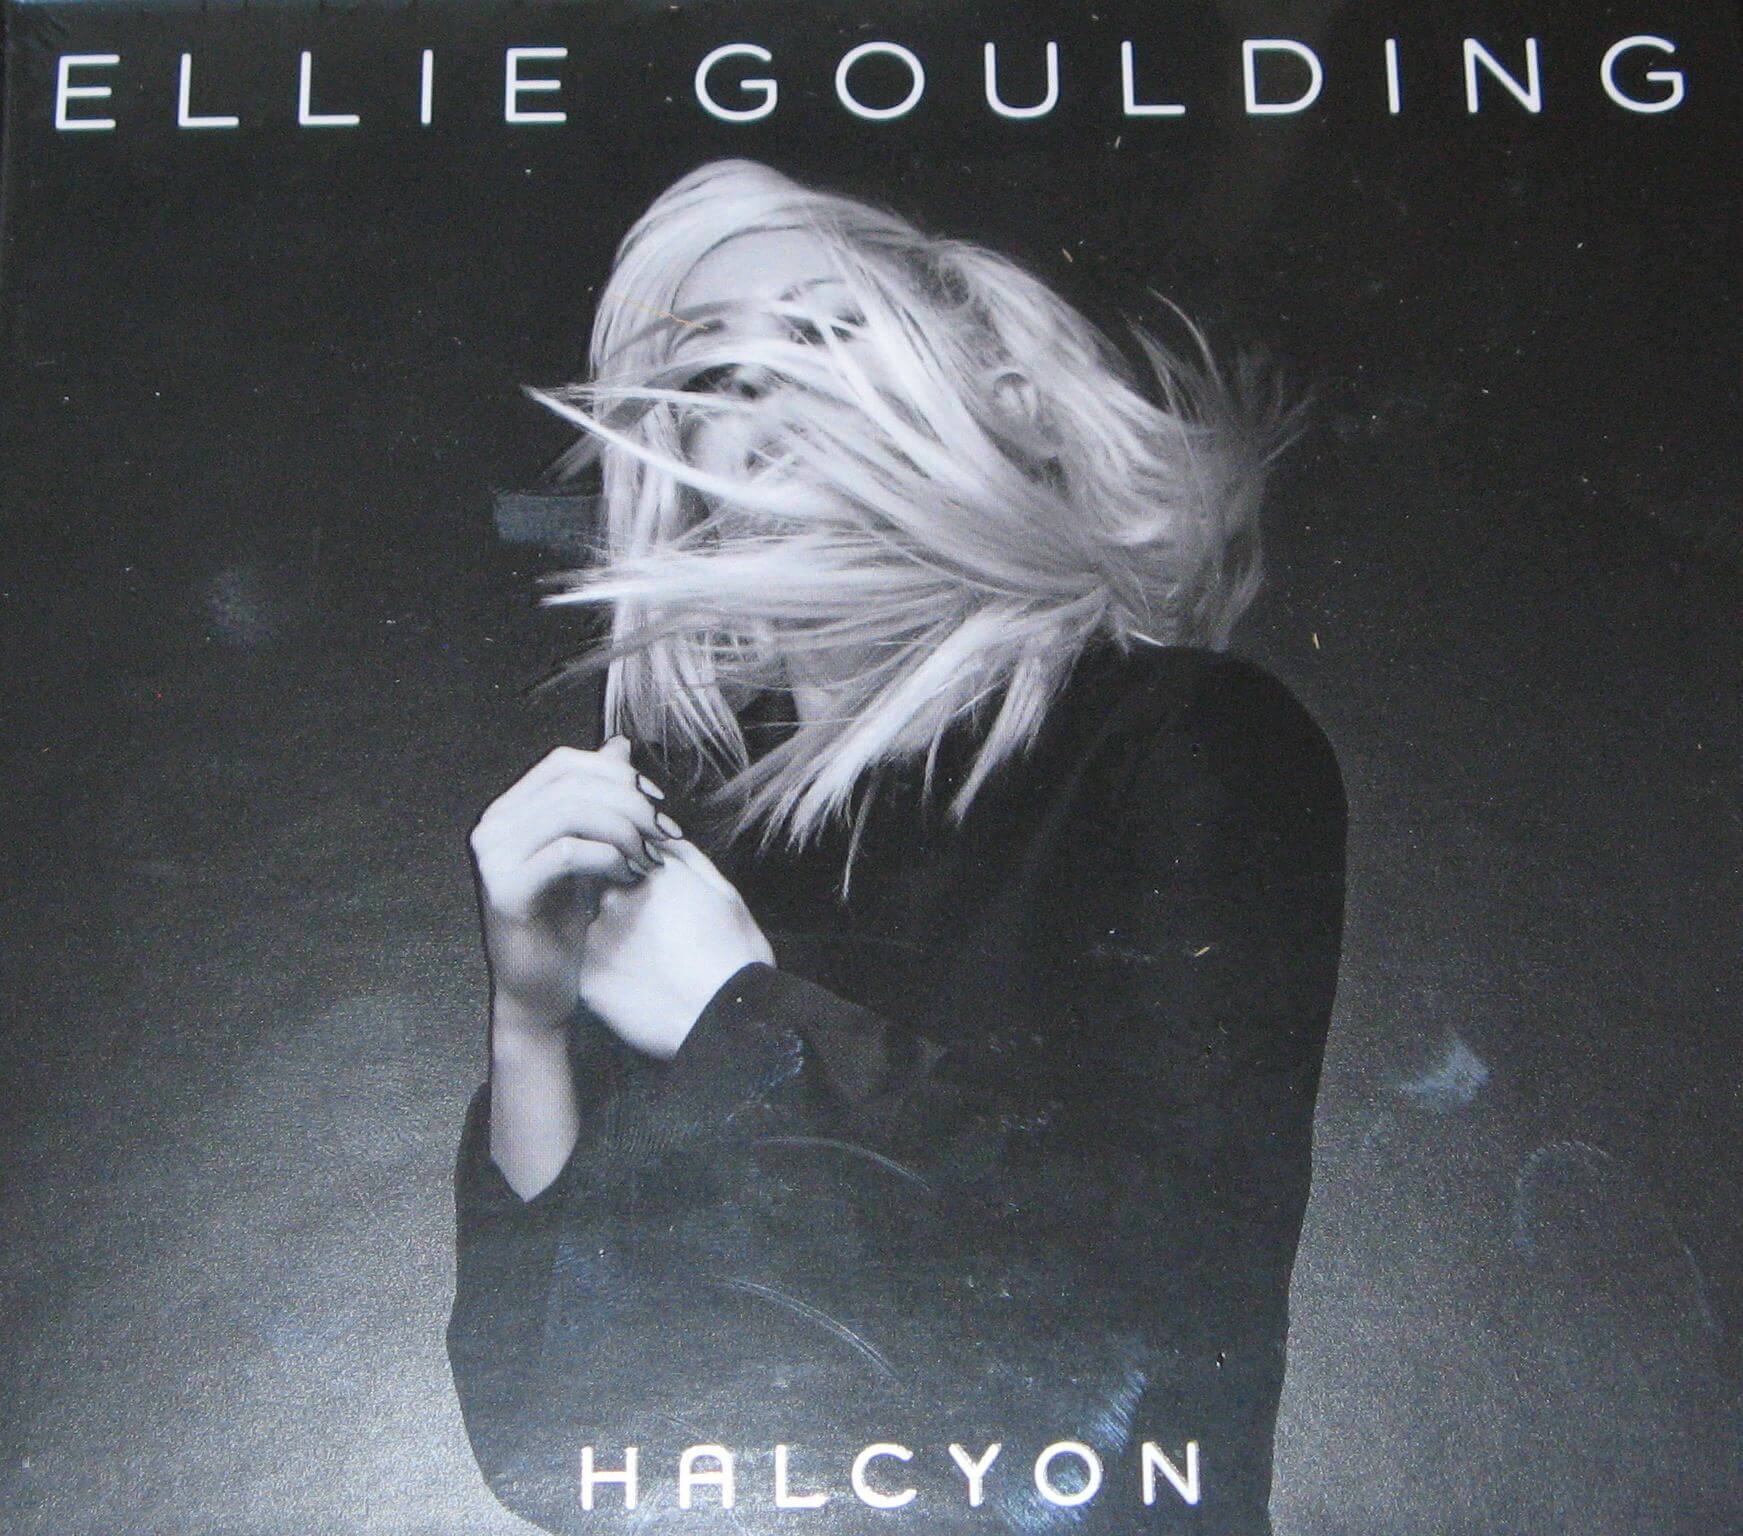 Ellie Goudling: “Halcyon Special Edition” CD – Presley Collectibles